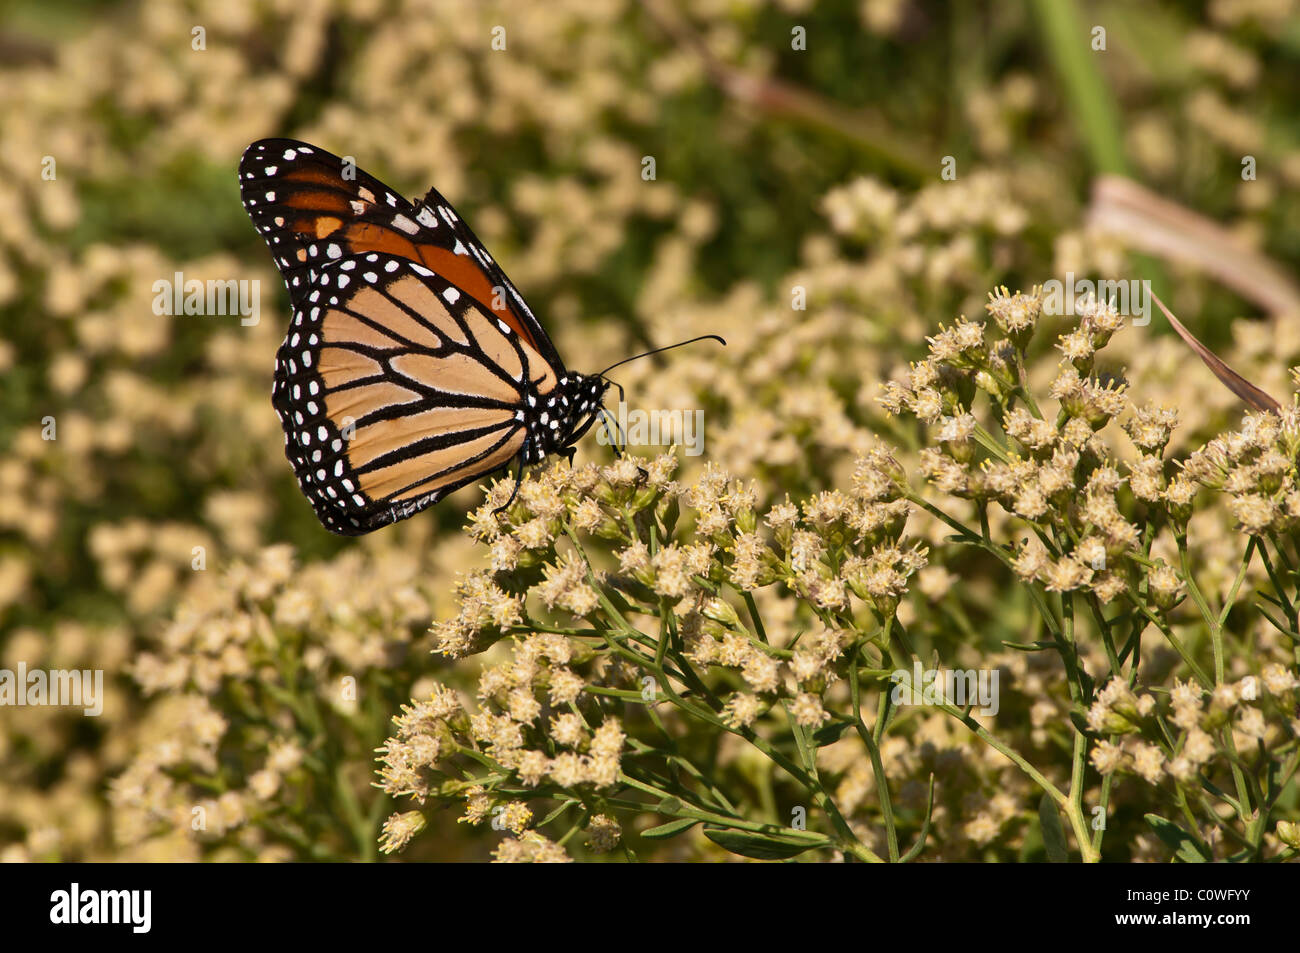 A single monarch butterfly feeding on white flowers, monarch migration St. Marks National Wildlife Refuge, Florida Stock Photo